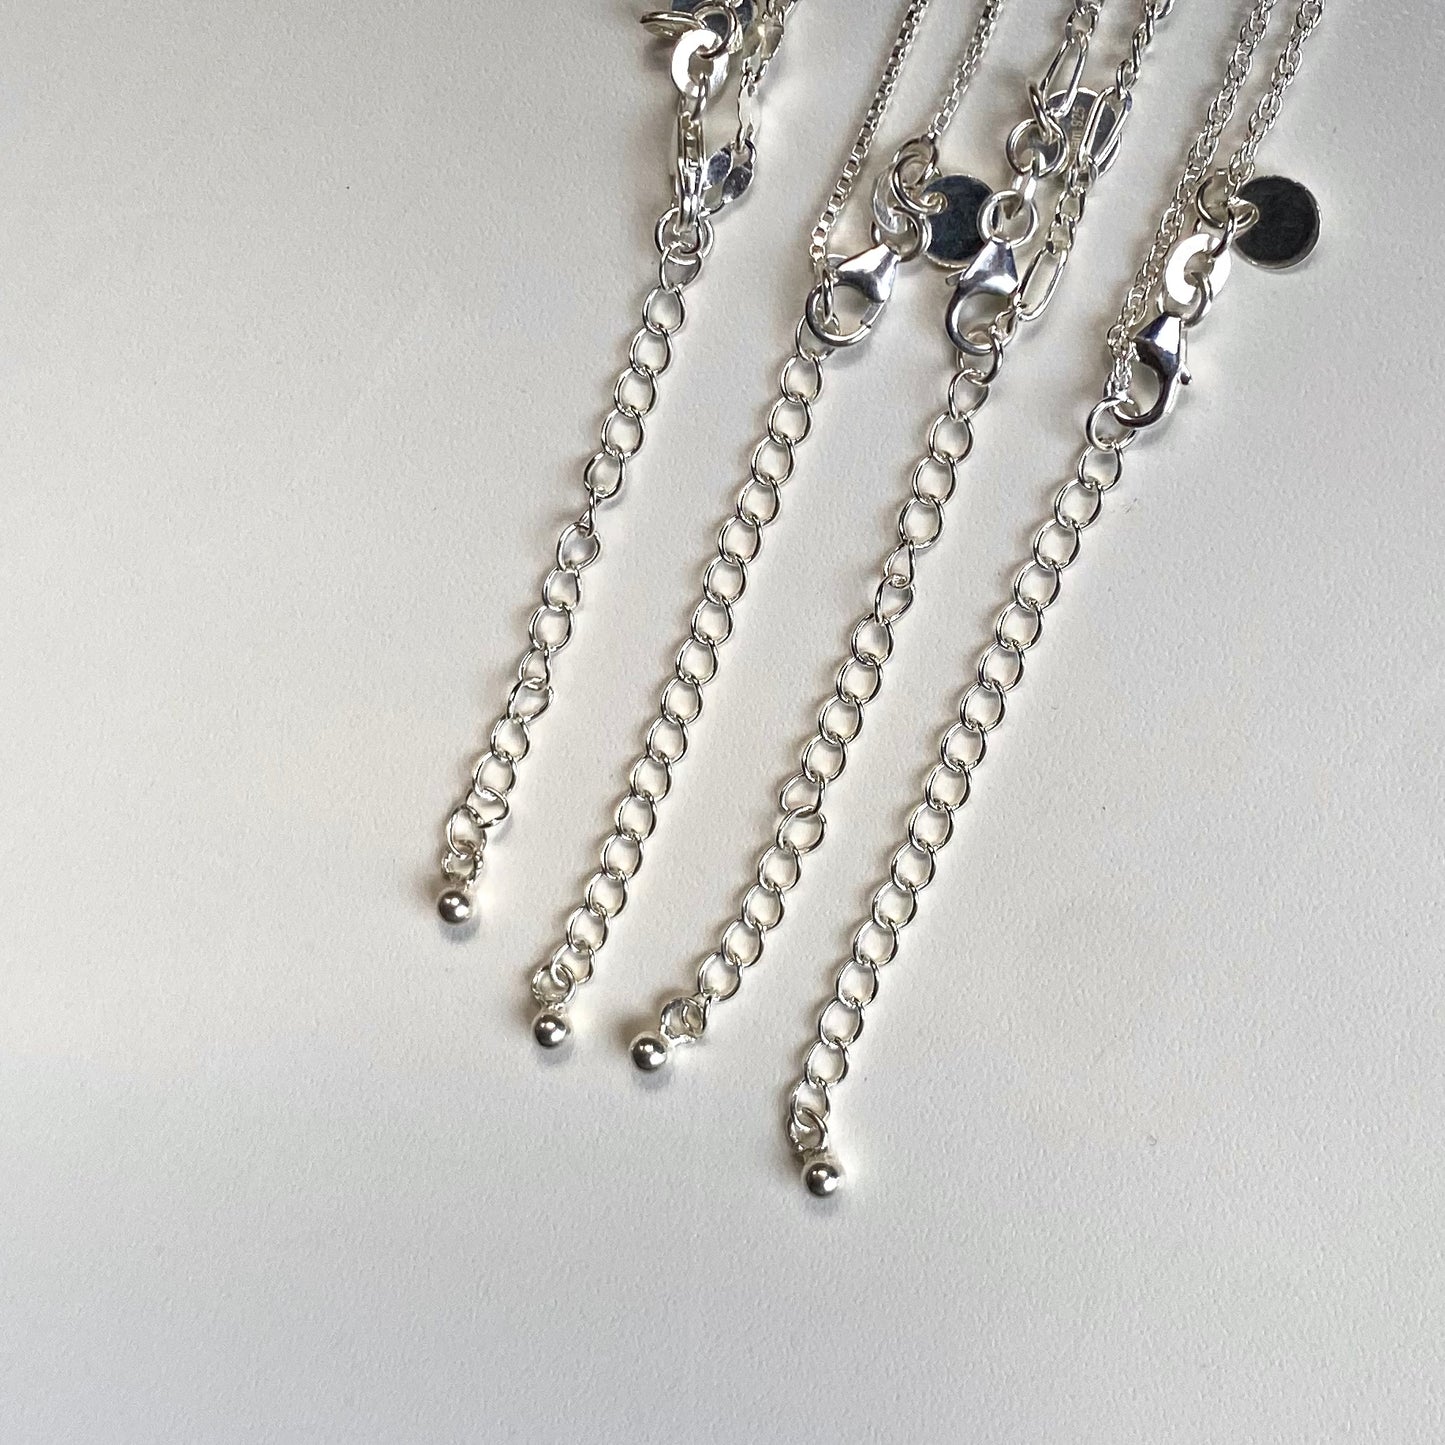 Silver925 chain necklace 2